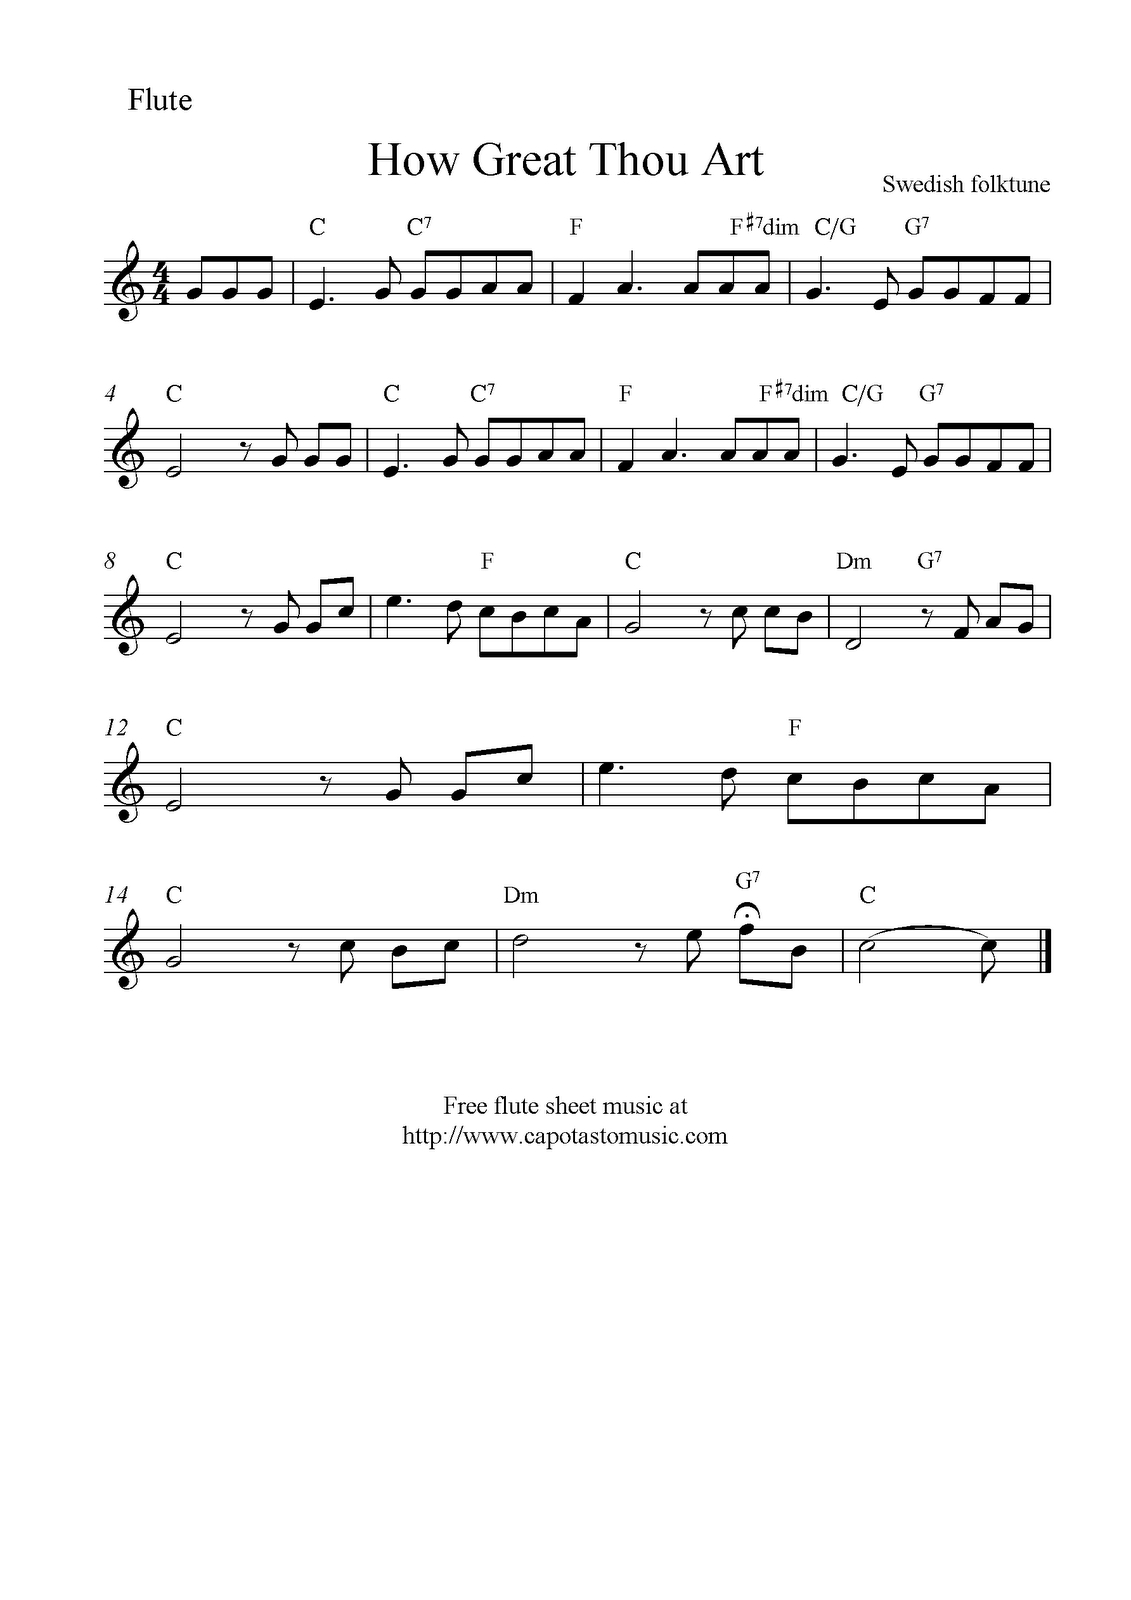 How Great Thou Art, Free Christian Flute Sheet Music Notes - Free Printable Flute Music